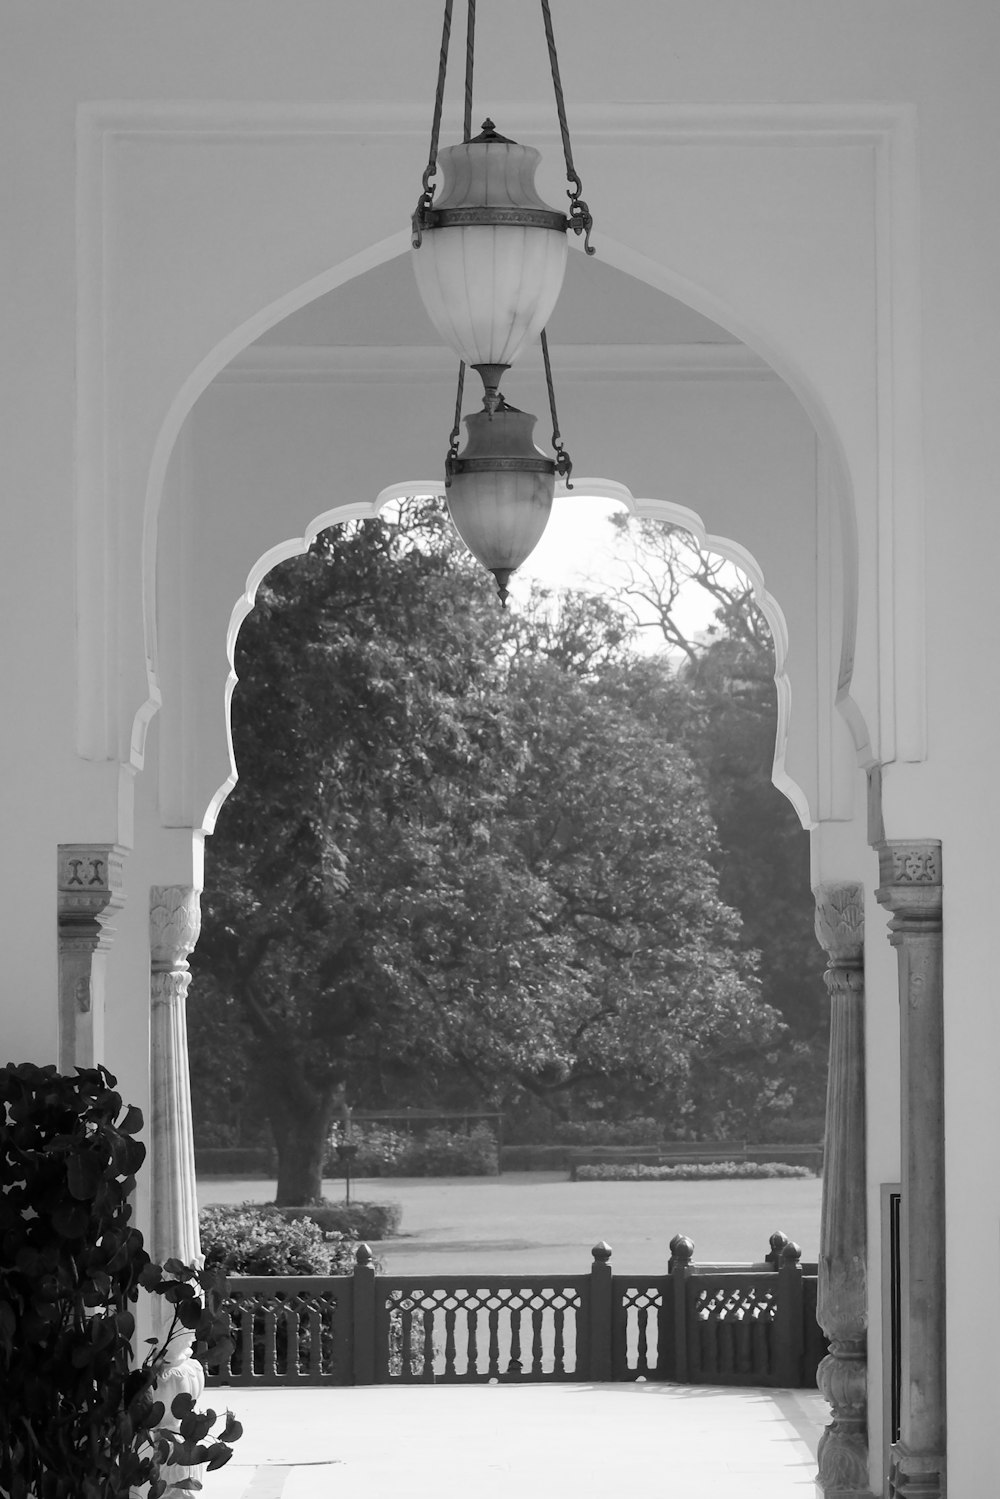 a black and white photo of an archway